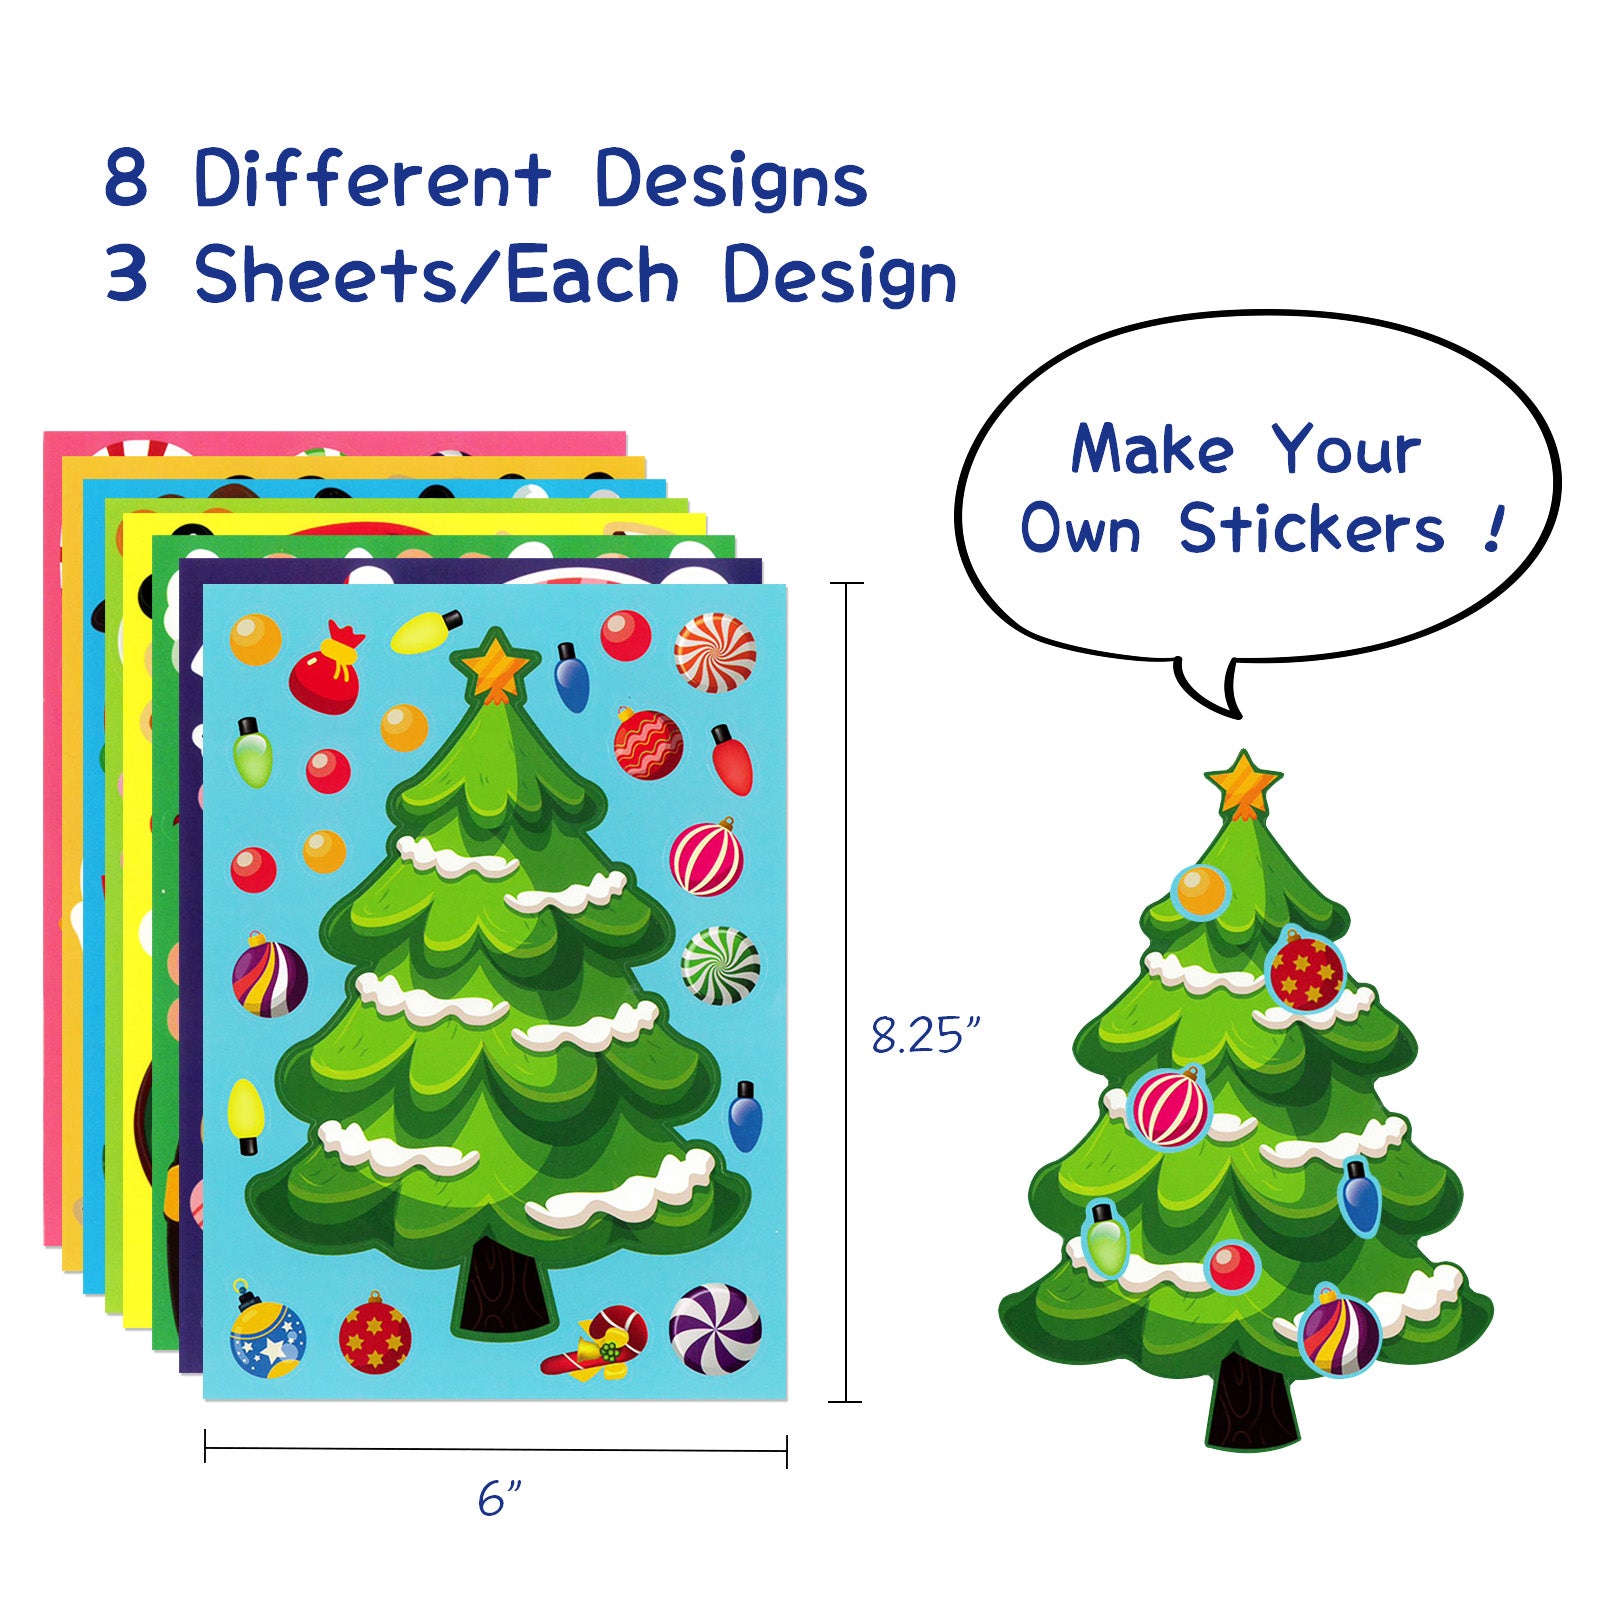 Shiny Stickers, 3d Colorful Baby Rewards & Holiday Decoration Stickers